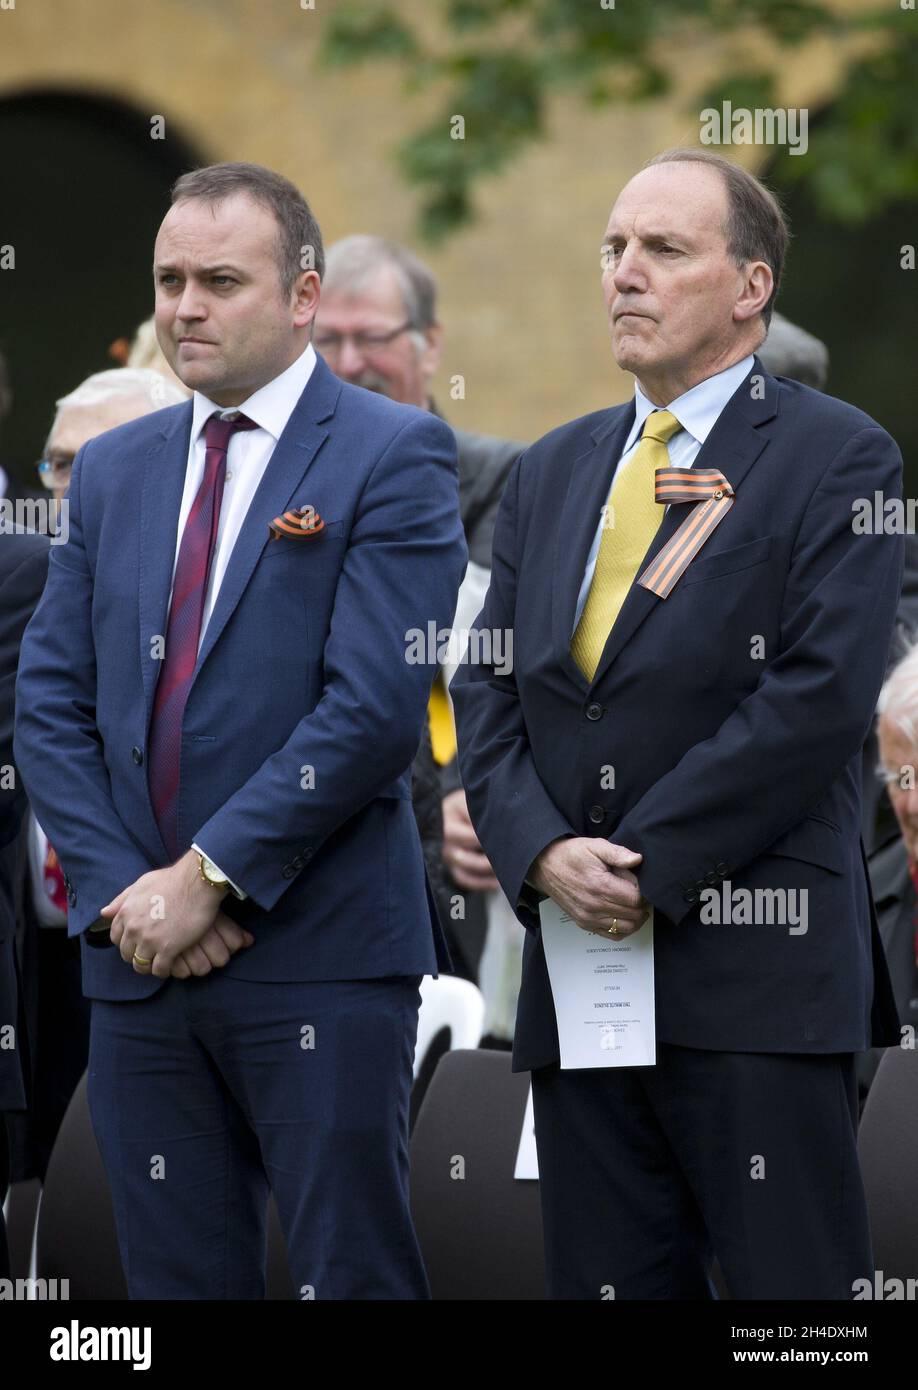 British politicians Neil Coyle and Simon Hughes attend Victory Day celebrations at the Soviet War Memorial in London, to mark the 72nd anniversary of the victory of the Soviet Army and its Allies over Nazi Germany in World War II. Picture dated: Tuesday May 9, 2017. Photo credit should read: Isabel Infantes / EMPICS Entertainment. Stock Photo